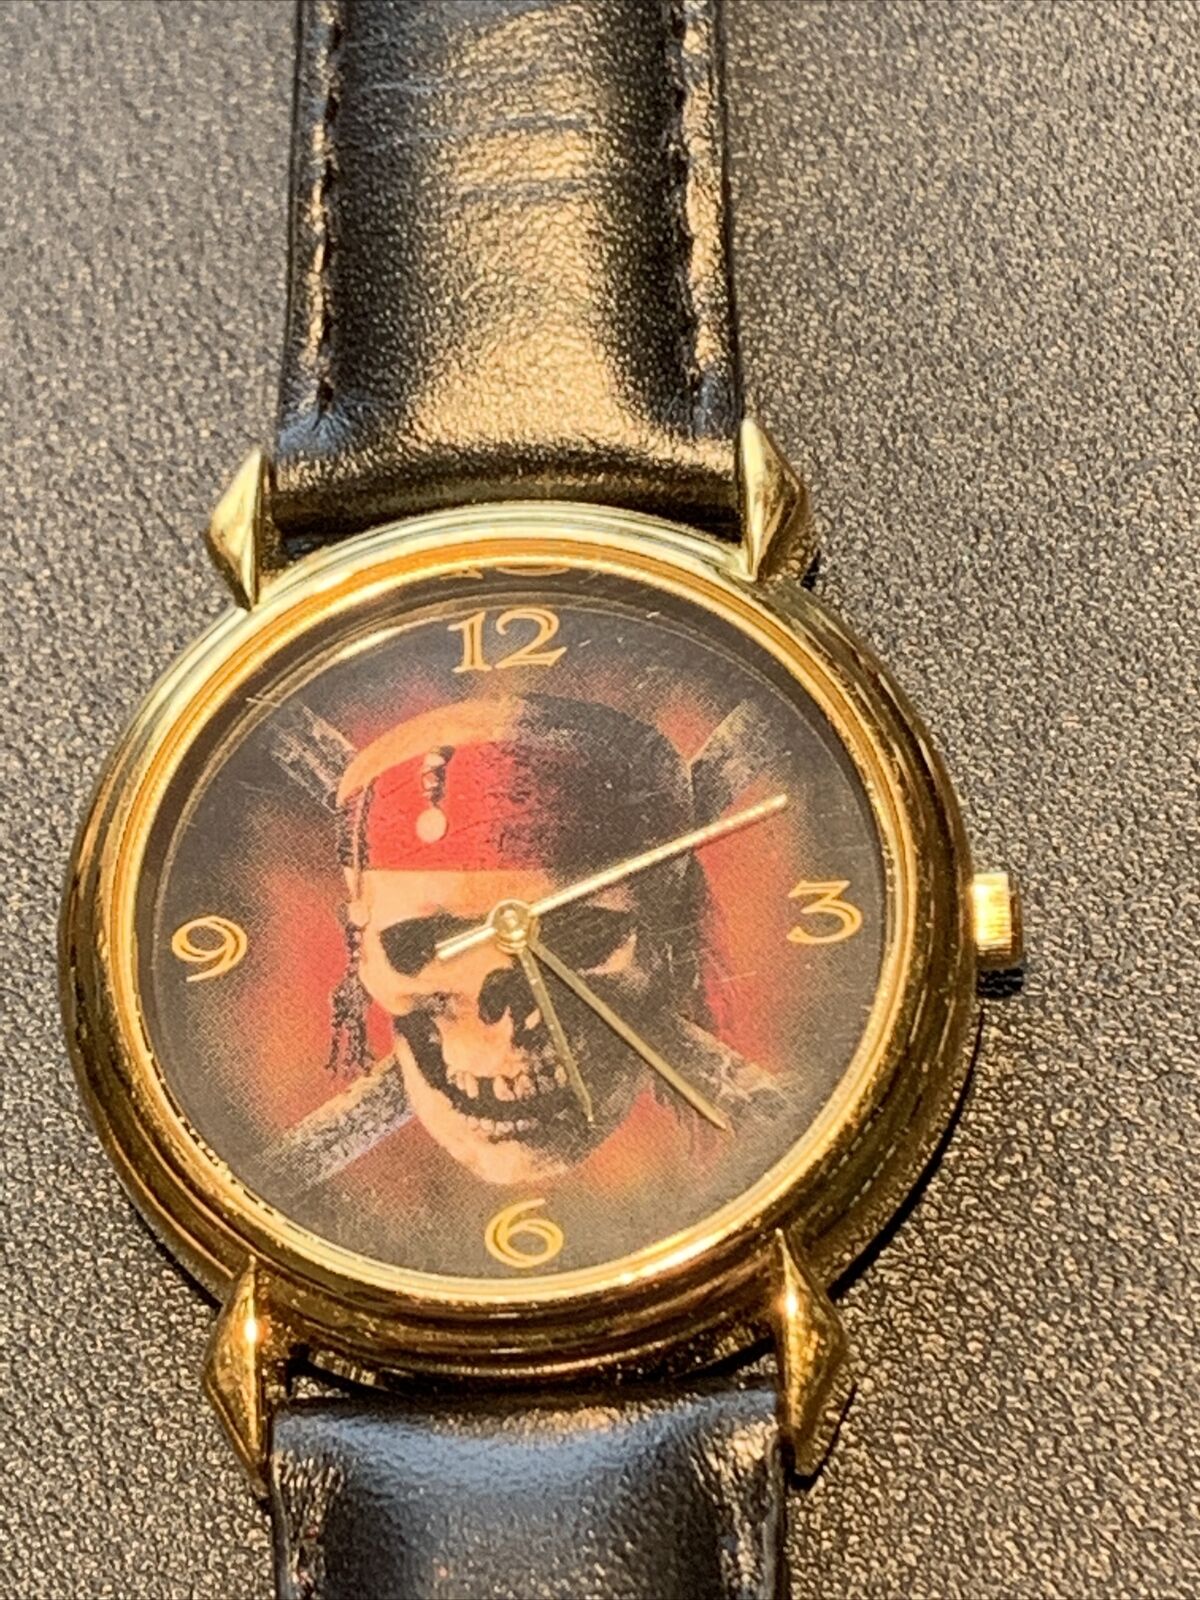 Disney PIRATES OF THE CARIBBEAN Watch Special Edition Johnny Depp Capt. Jack